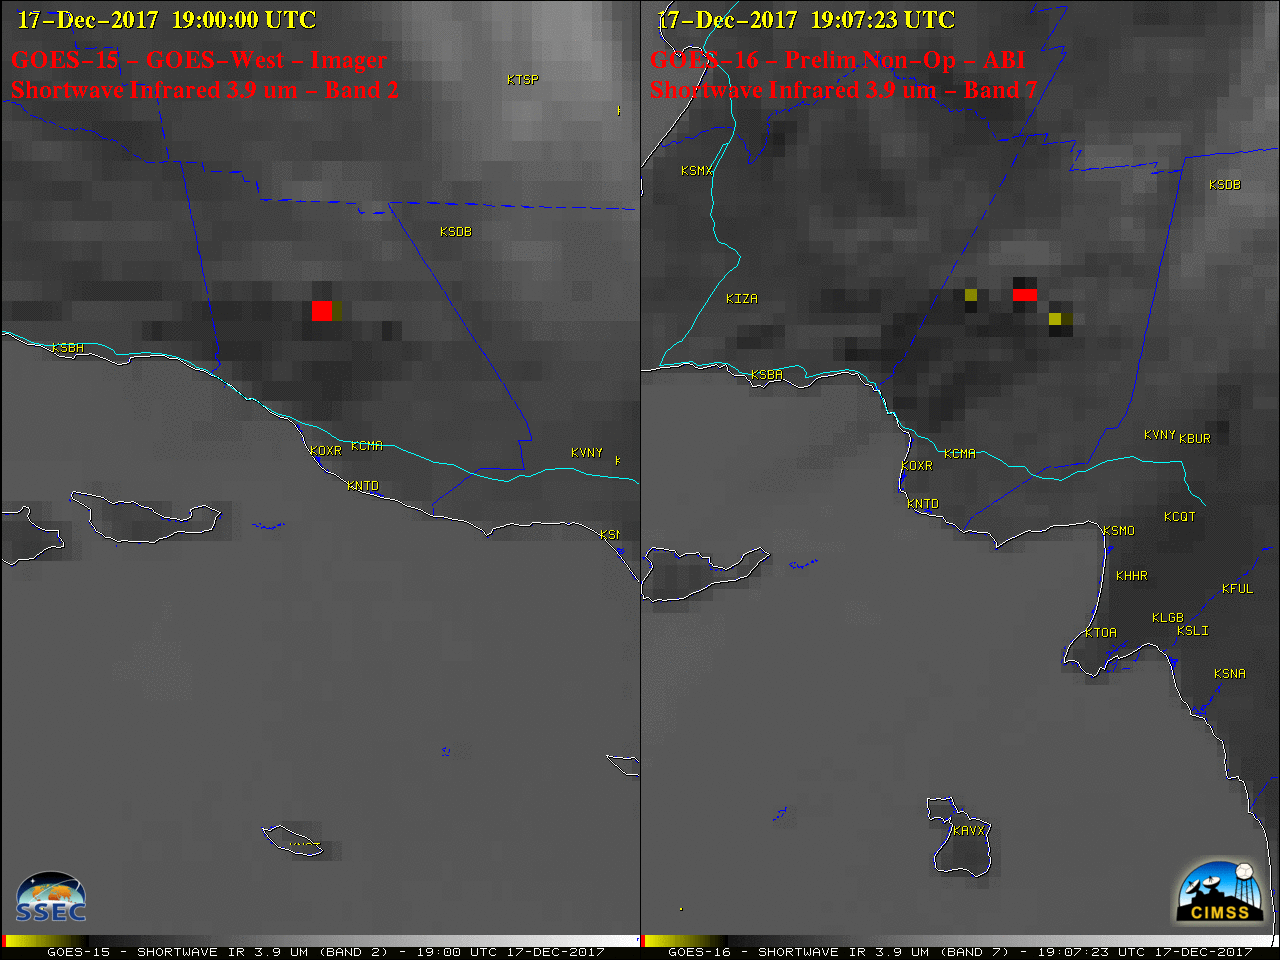 GOES-15 (left) and GOES-16 (right) Shortwave Infrared (3.9 µm) images [click to play MP4 animation]